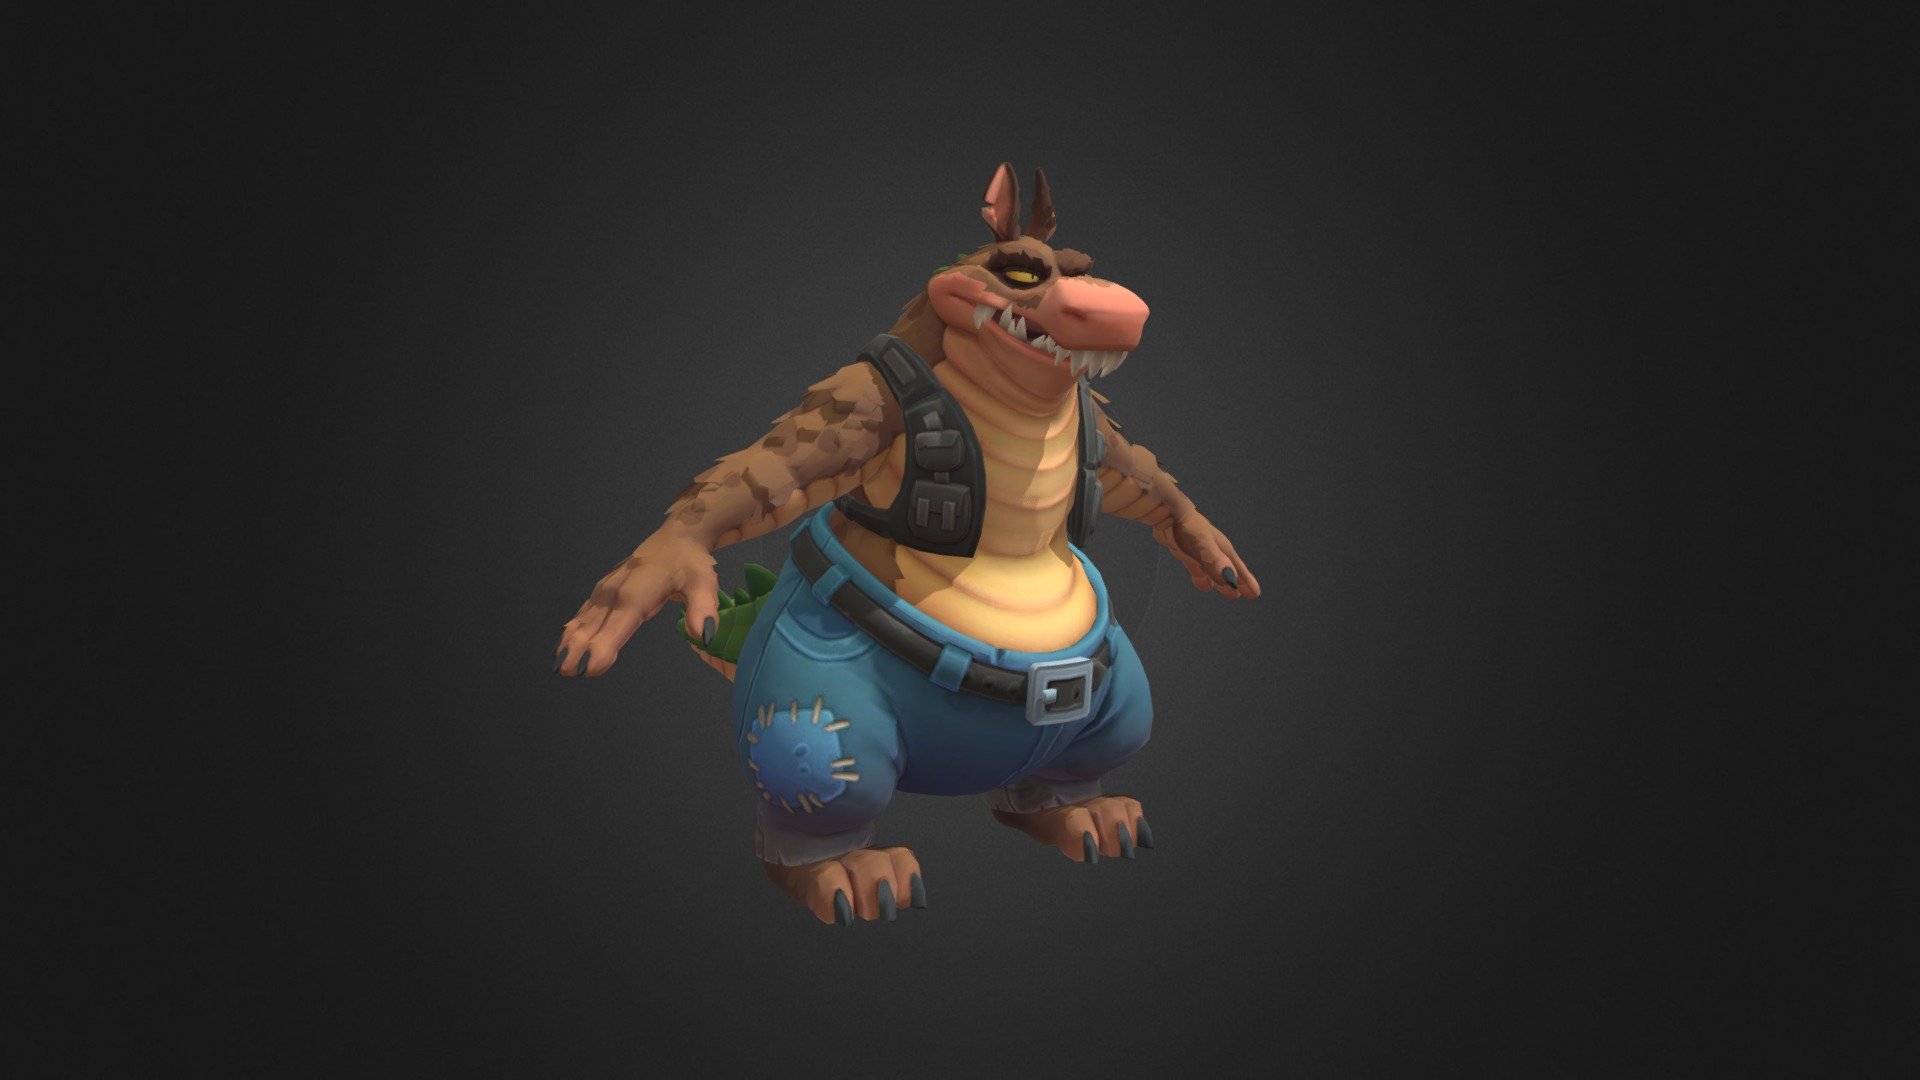 Dingodile Model From Crash 4 Its About Time, Model Ripped by robowil 
I do not own the model, Original Model owned by Toys For Bob, Airborn Studios and Activision
I Uploaded this because there wasn't any Offical models of Dingodile on Sketchfab to use as reference for art, so I took matters in my own hands 3d model